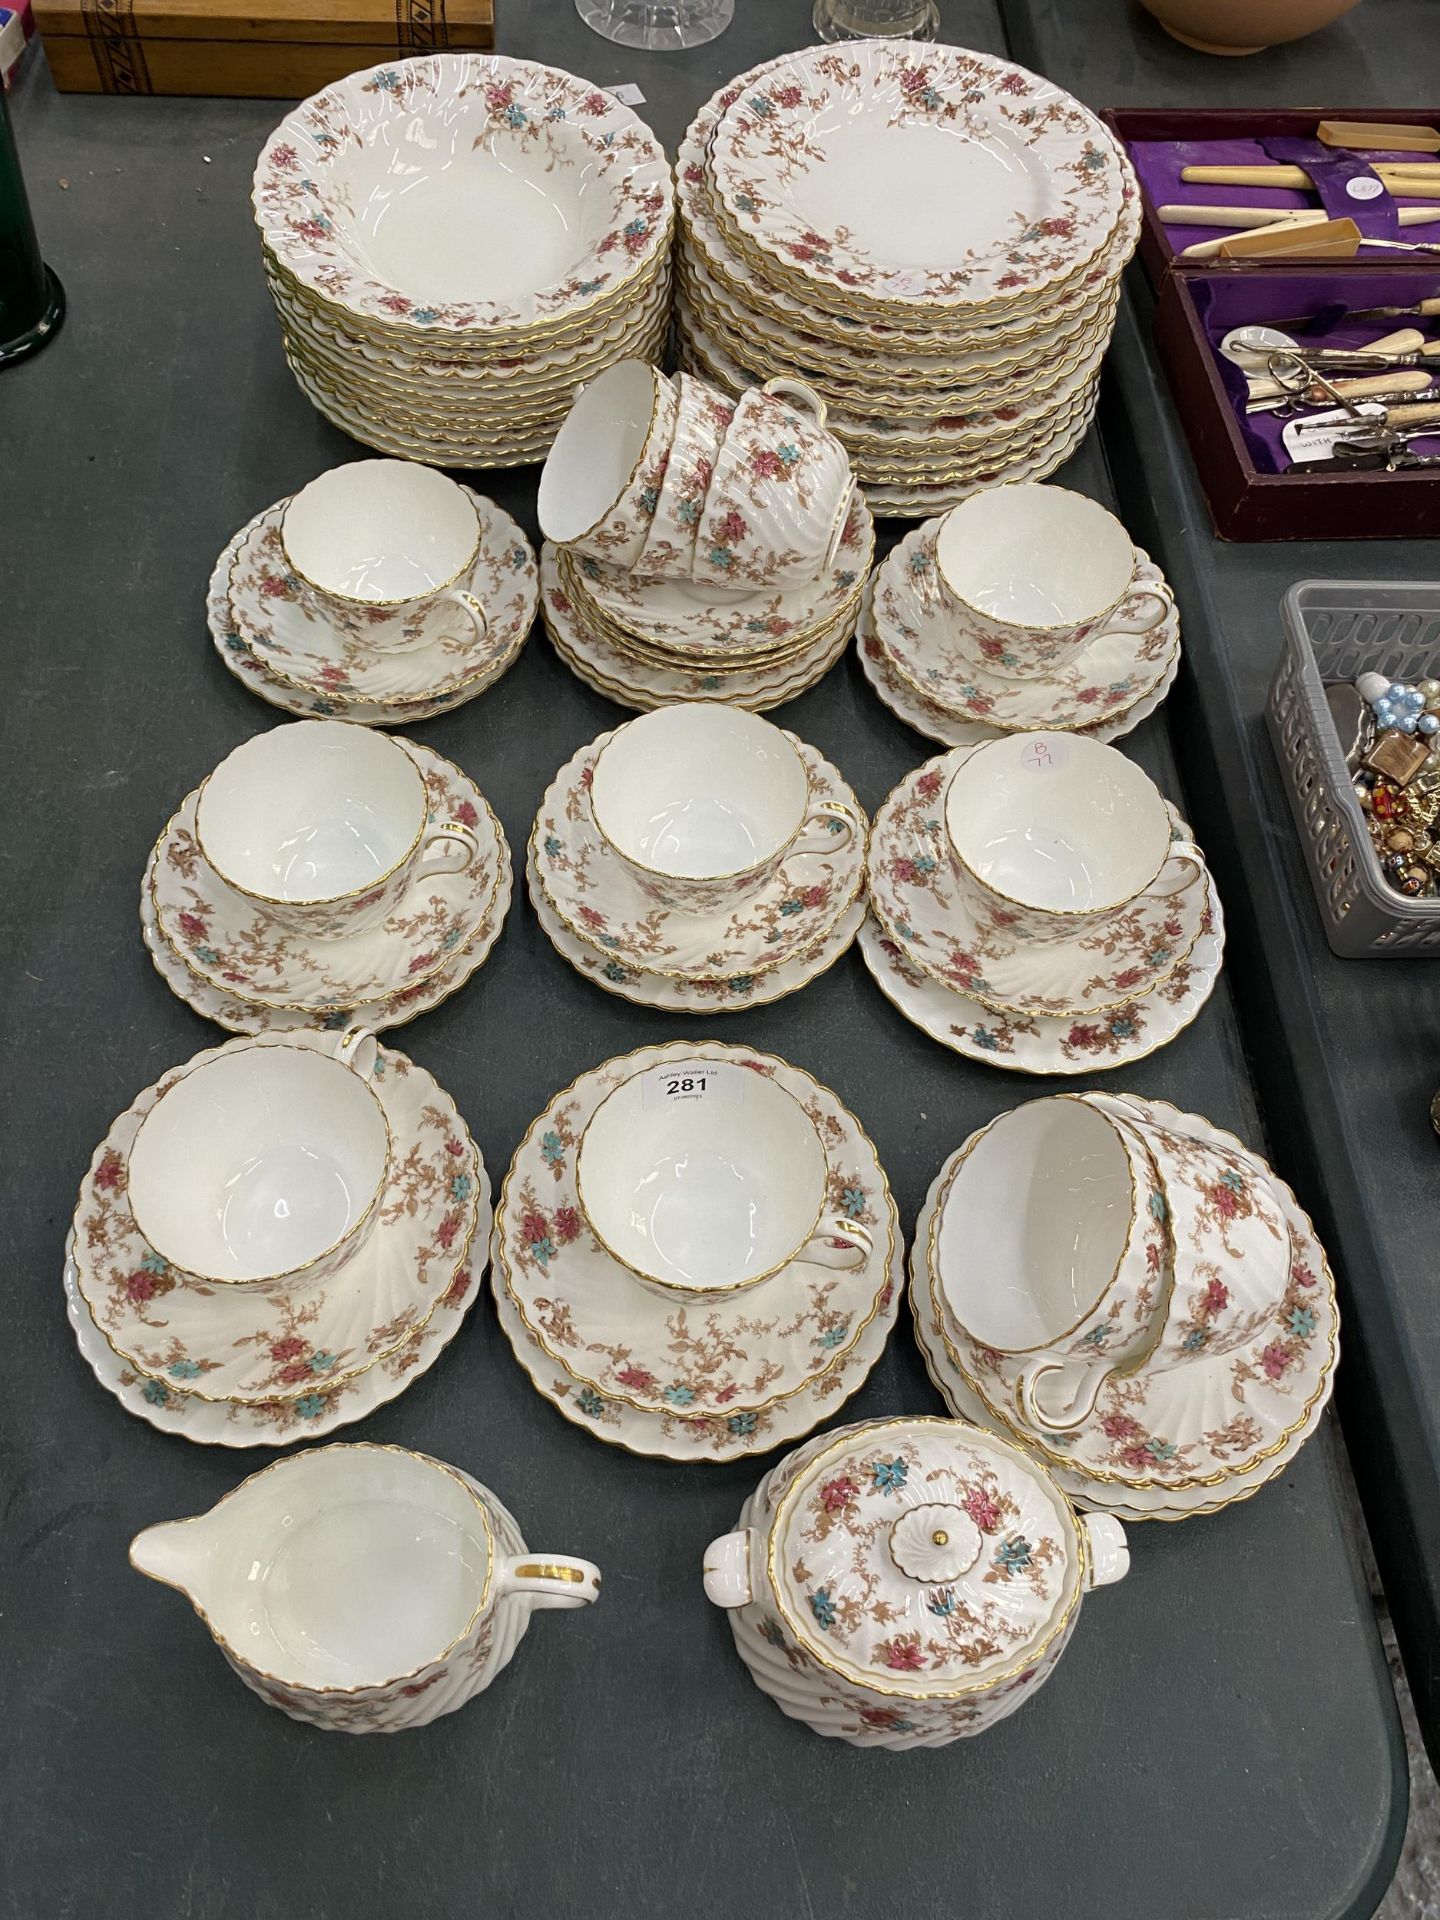 A LARGE QUANTITY OF MINTON 'ANCESTRAL' TEAWARE TO INCLUDE PLATES, BOWLS, CREAM JUG, SUGAR BOWL,